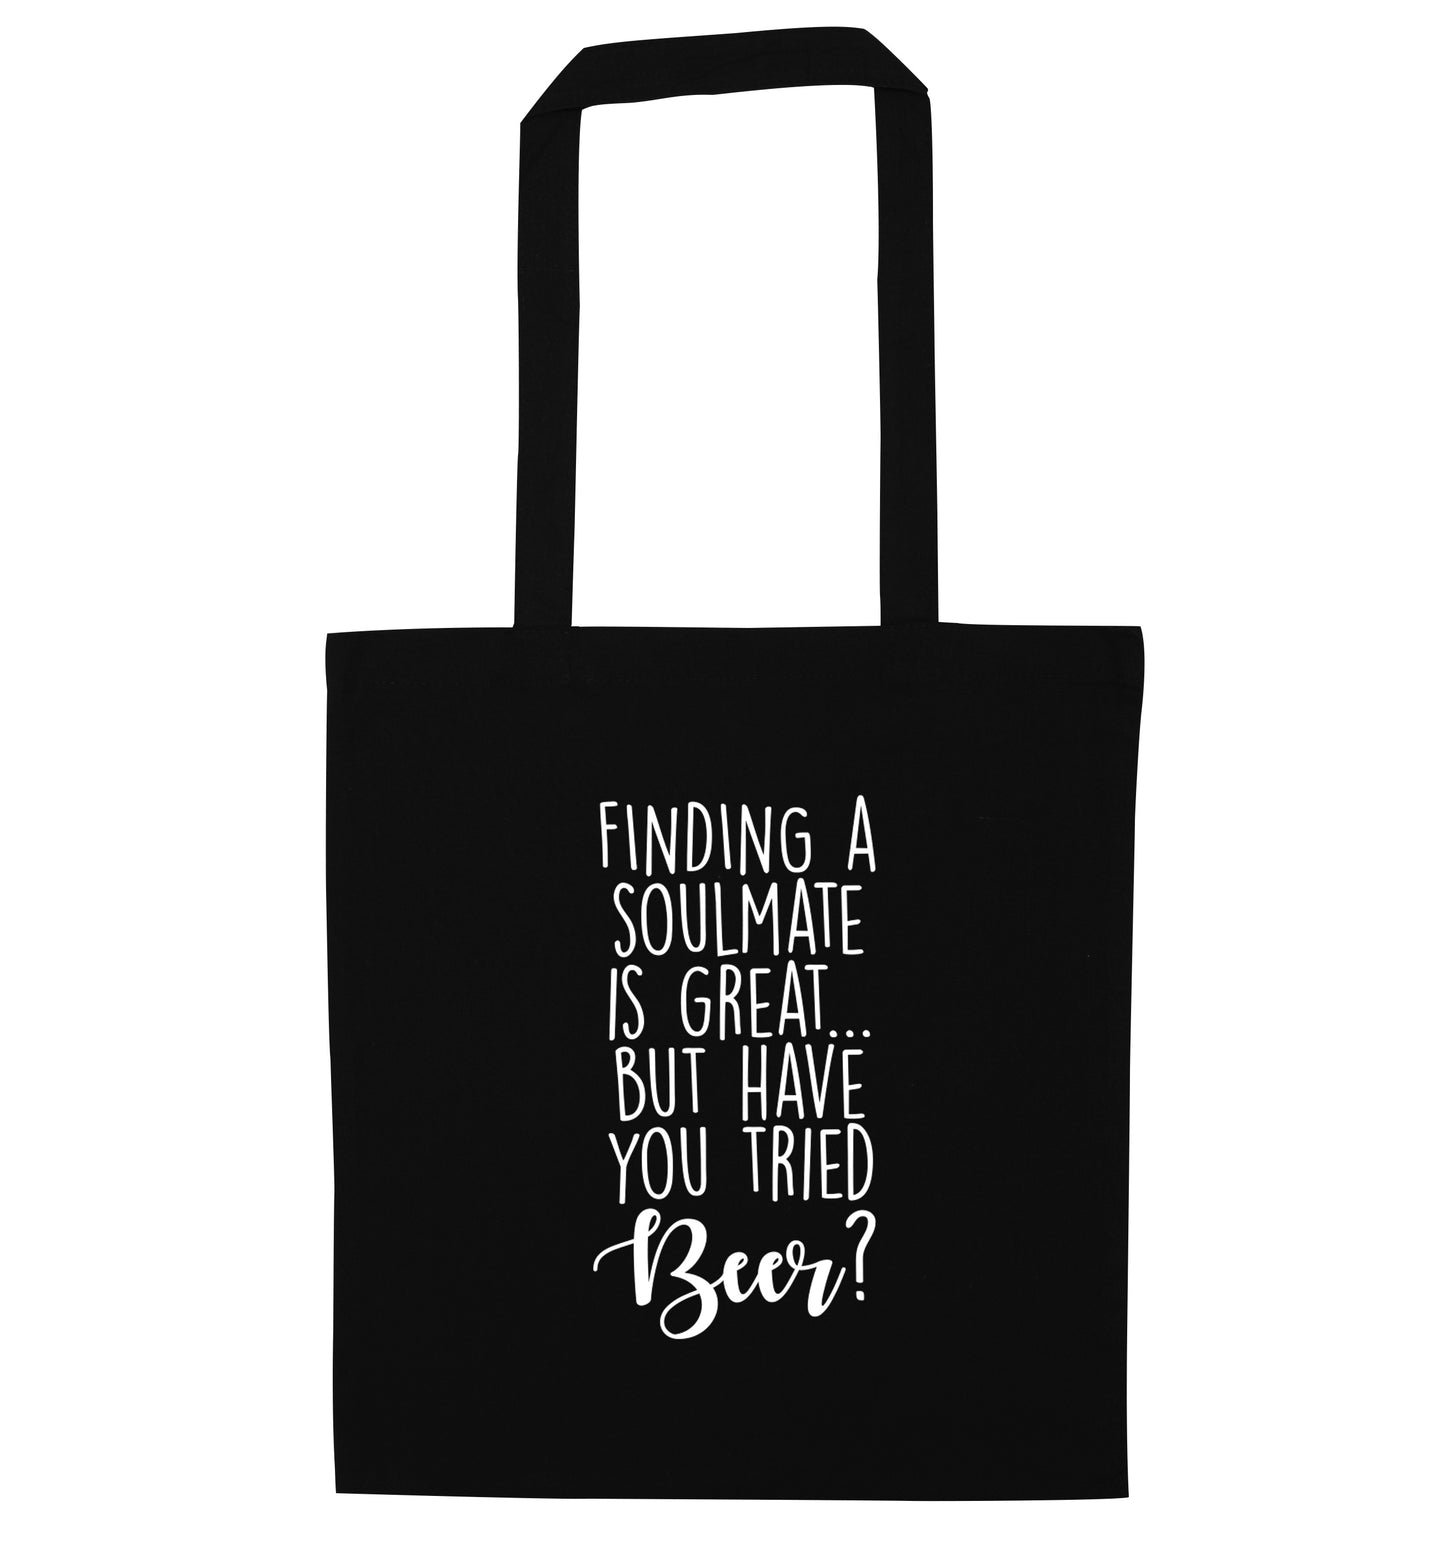 Finding a soulmate is great but have you tried beer? black tote bag